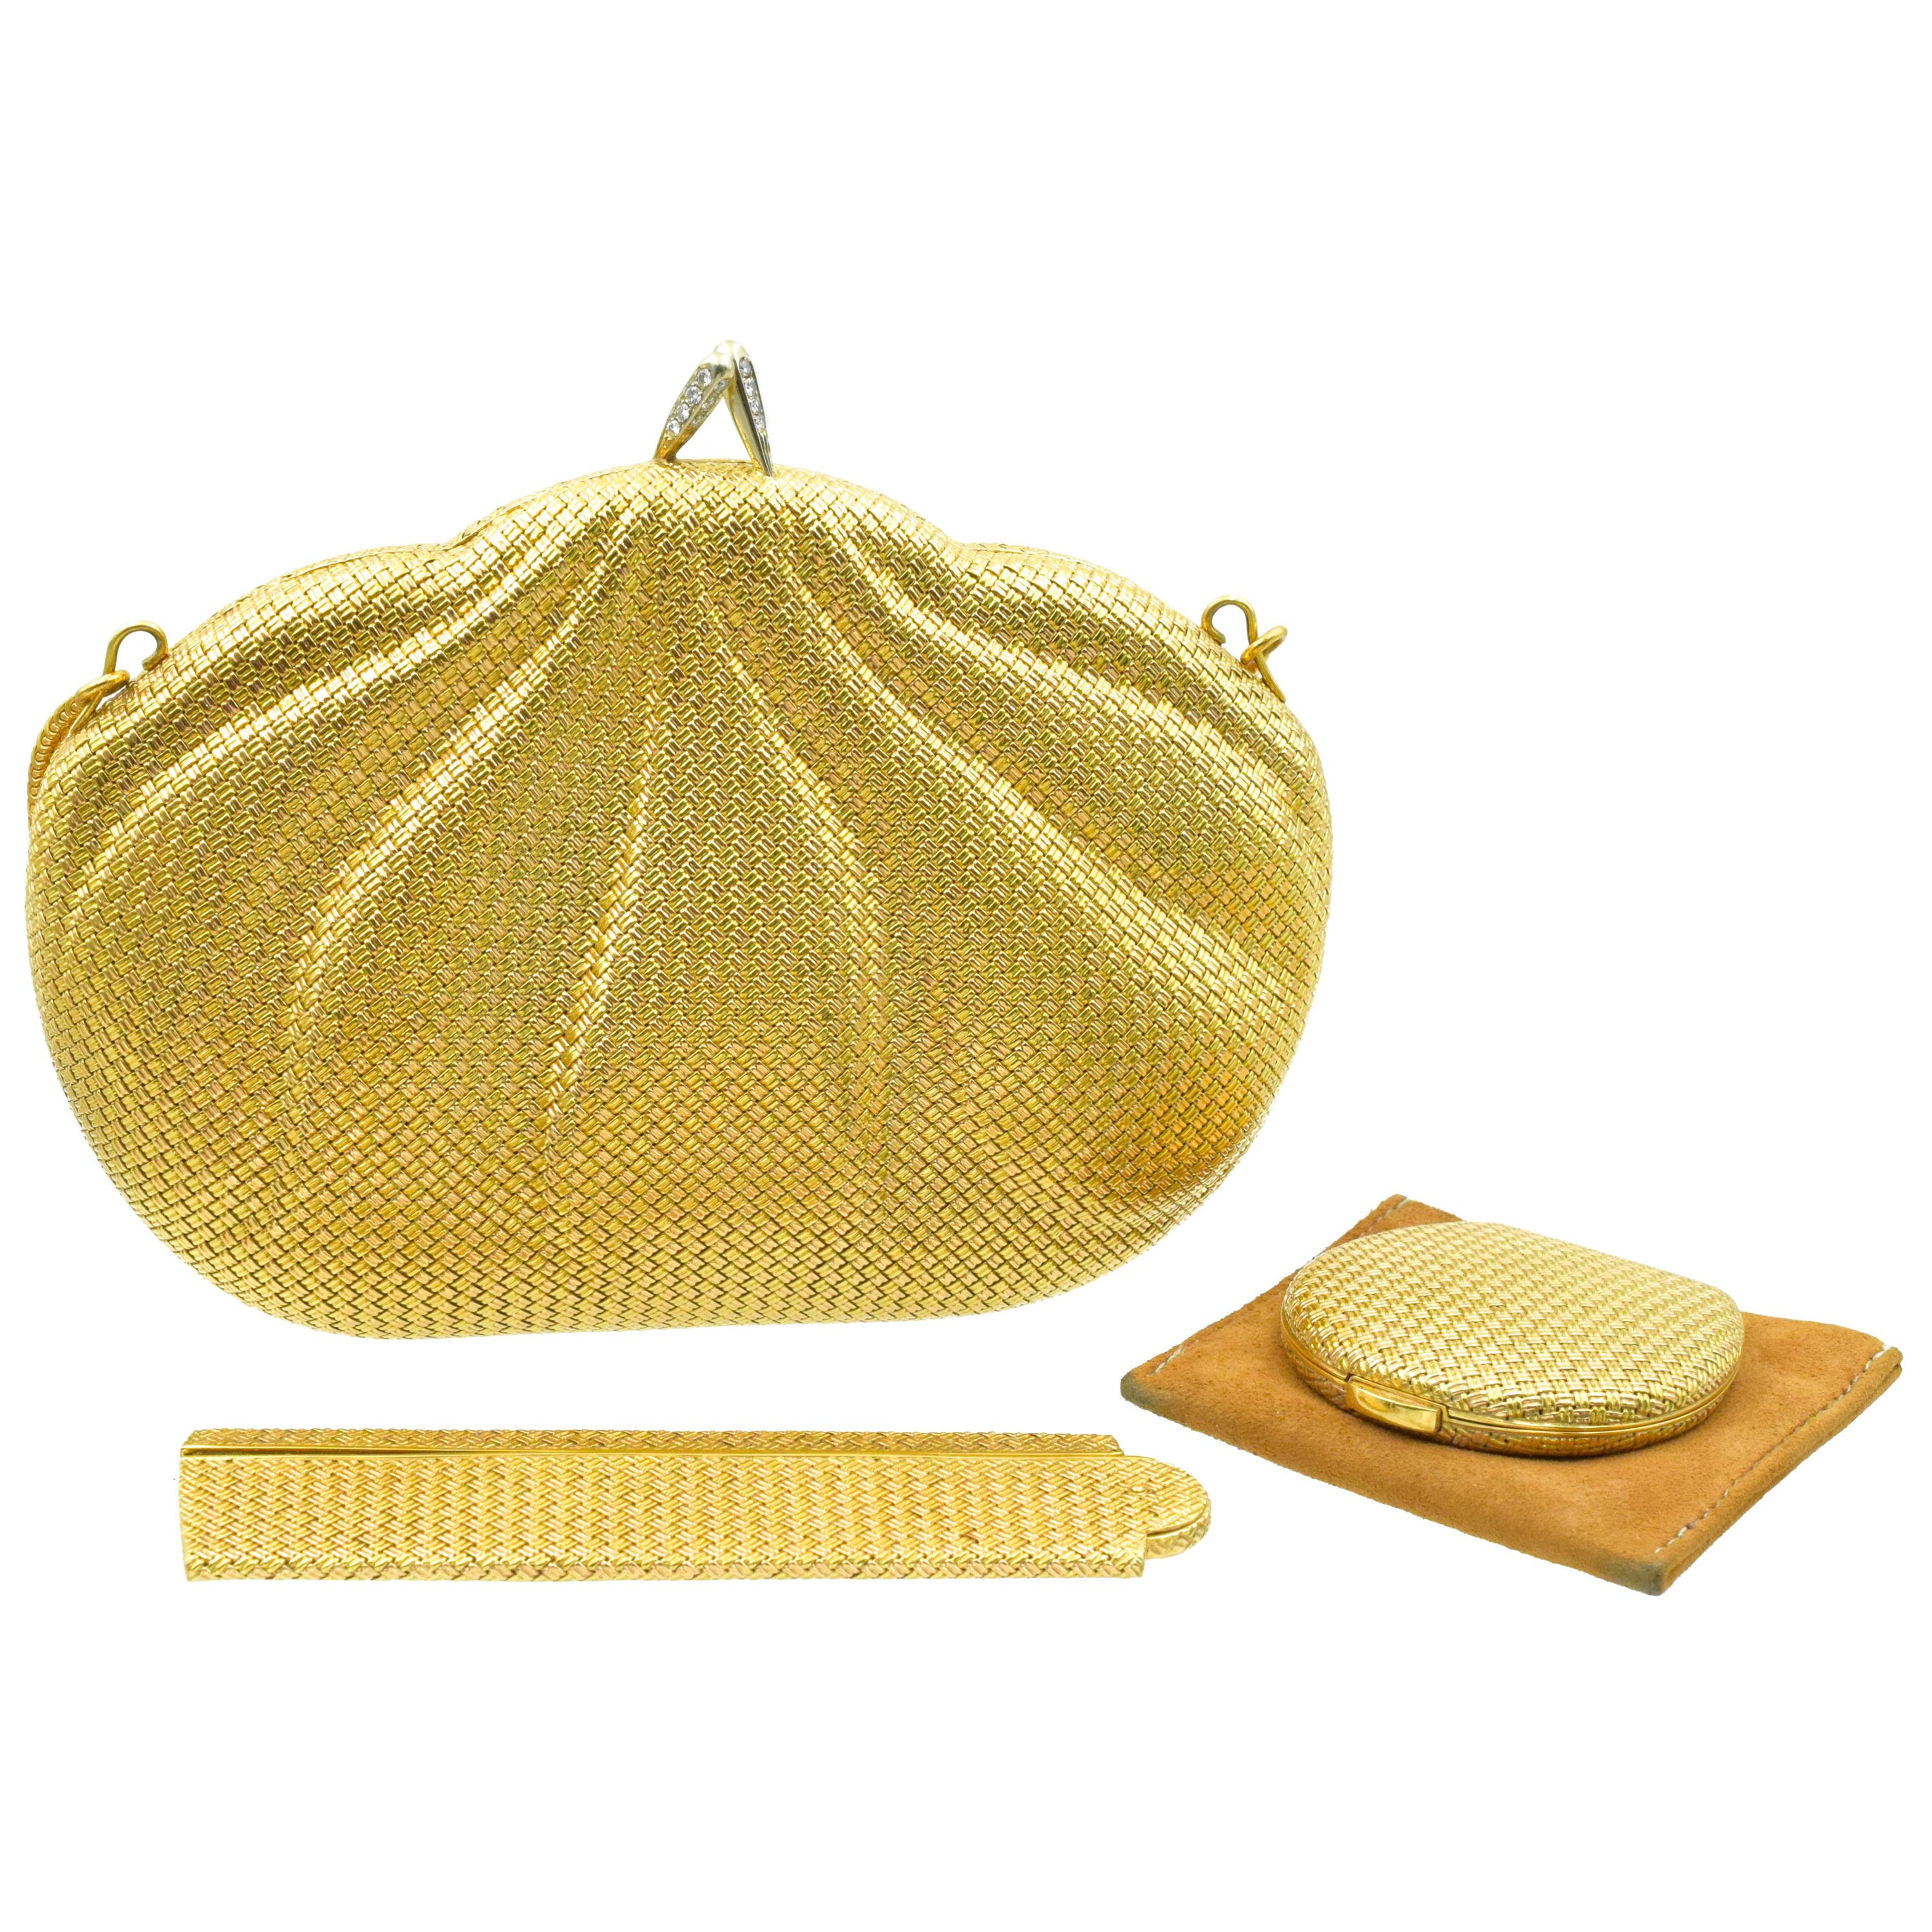 Piaget Gold and Diamond Evening Purse, a Comb and a Powder Compact